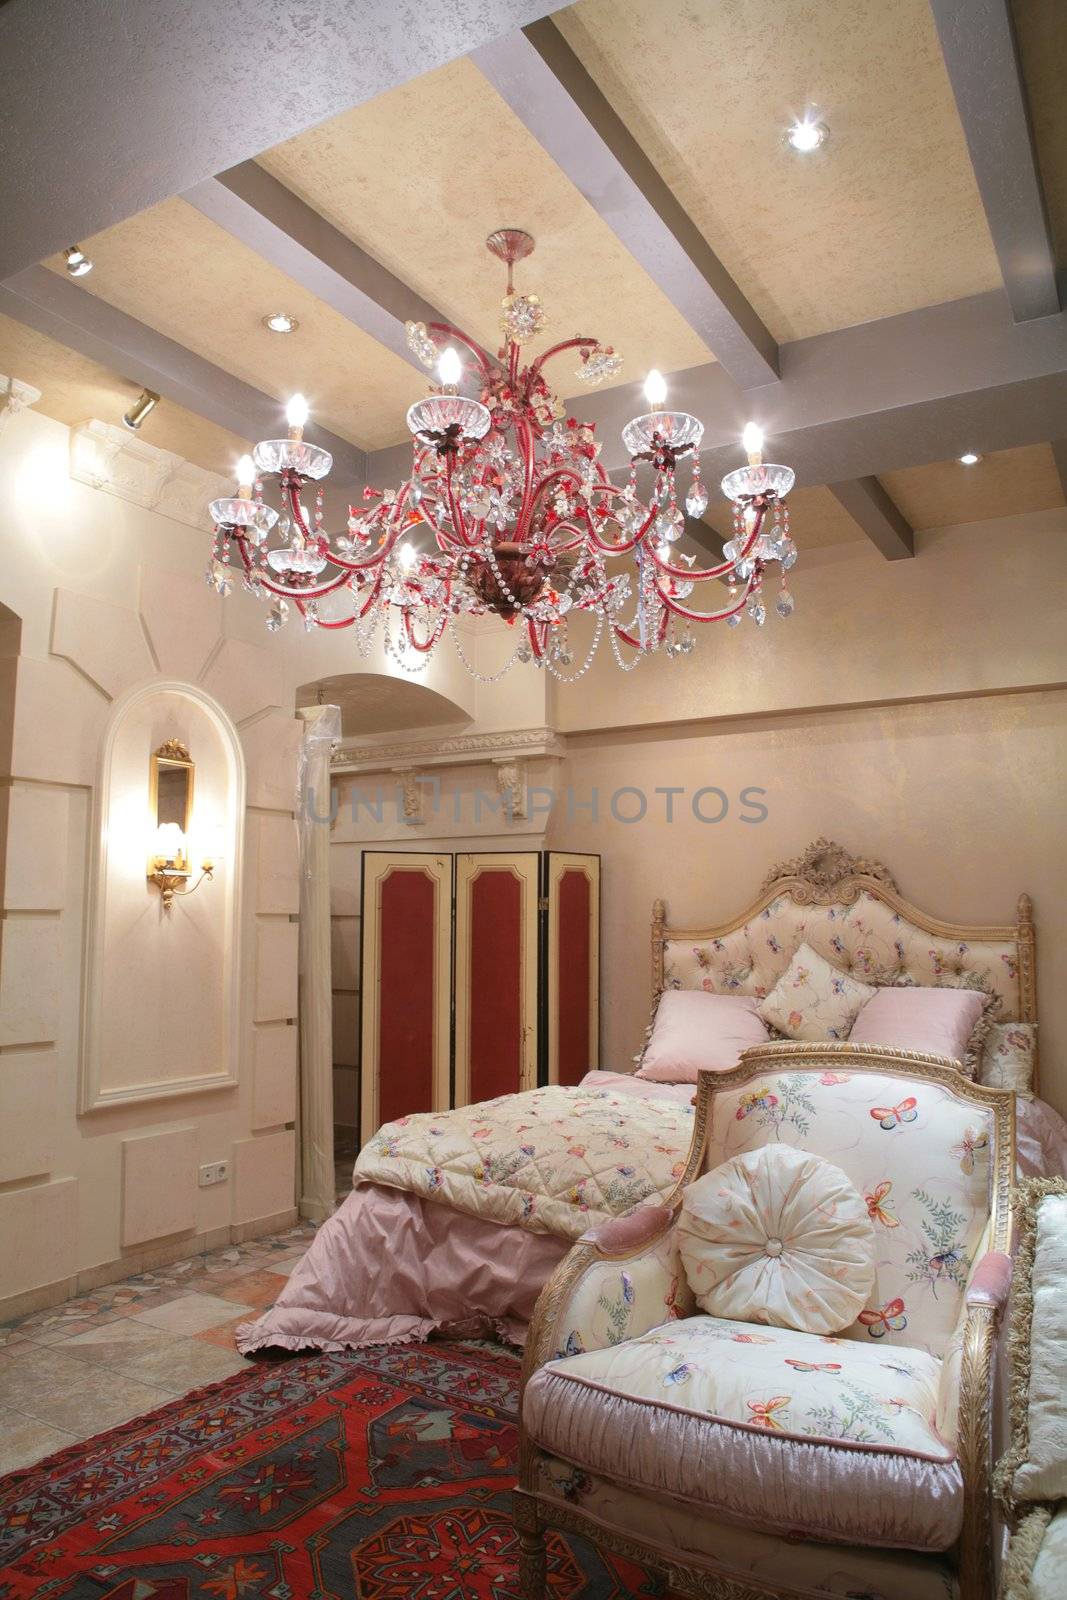 Interior to luxurious bedroom in rococo style, expensive furniture